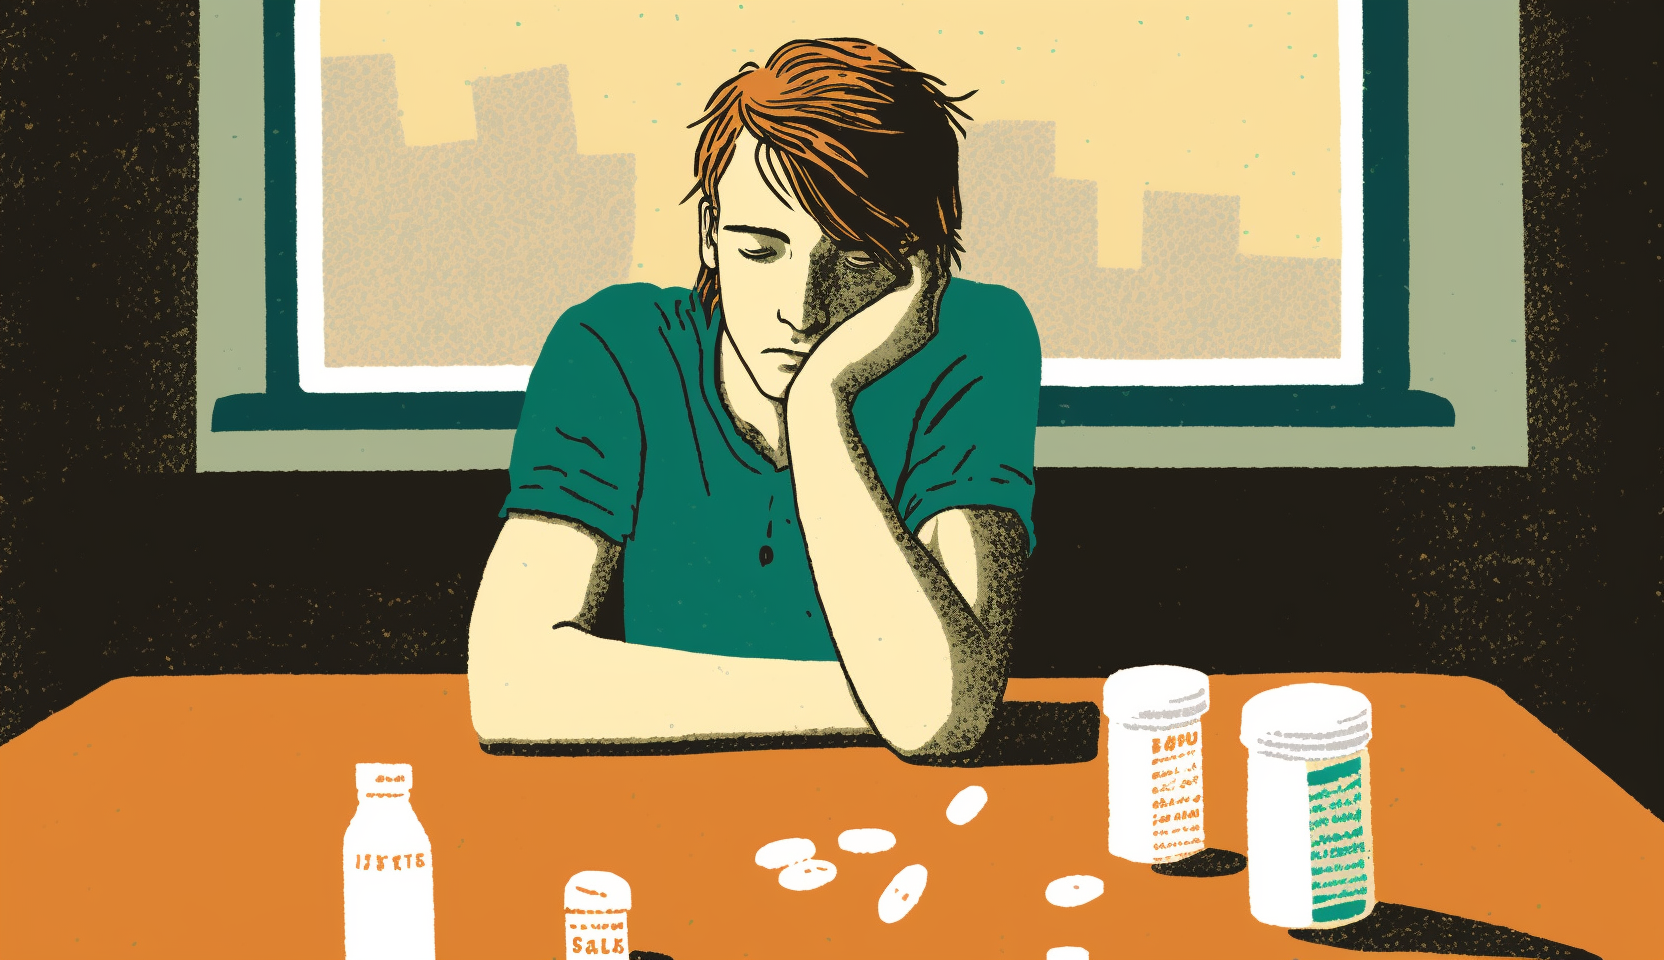 A man sitting down in front of a window, his hands are on the table. He looks tired, with medications scattered in front of him, suggesting that he's thinking about weaning off levothyroxine.